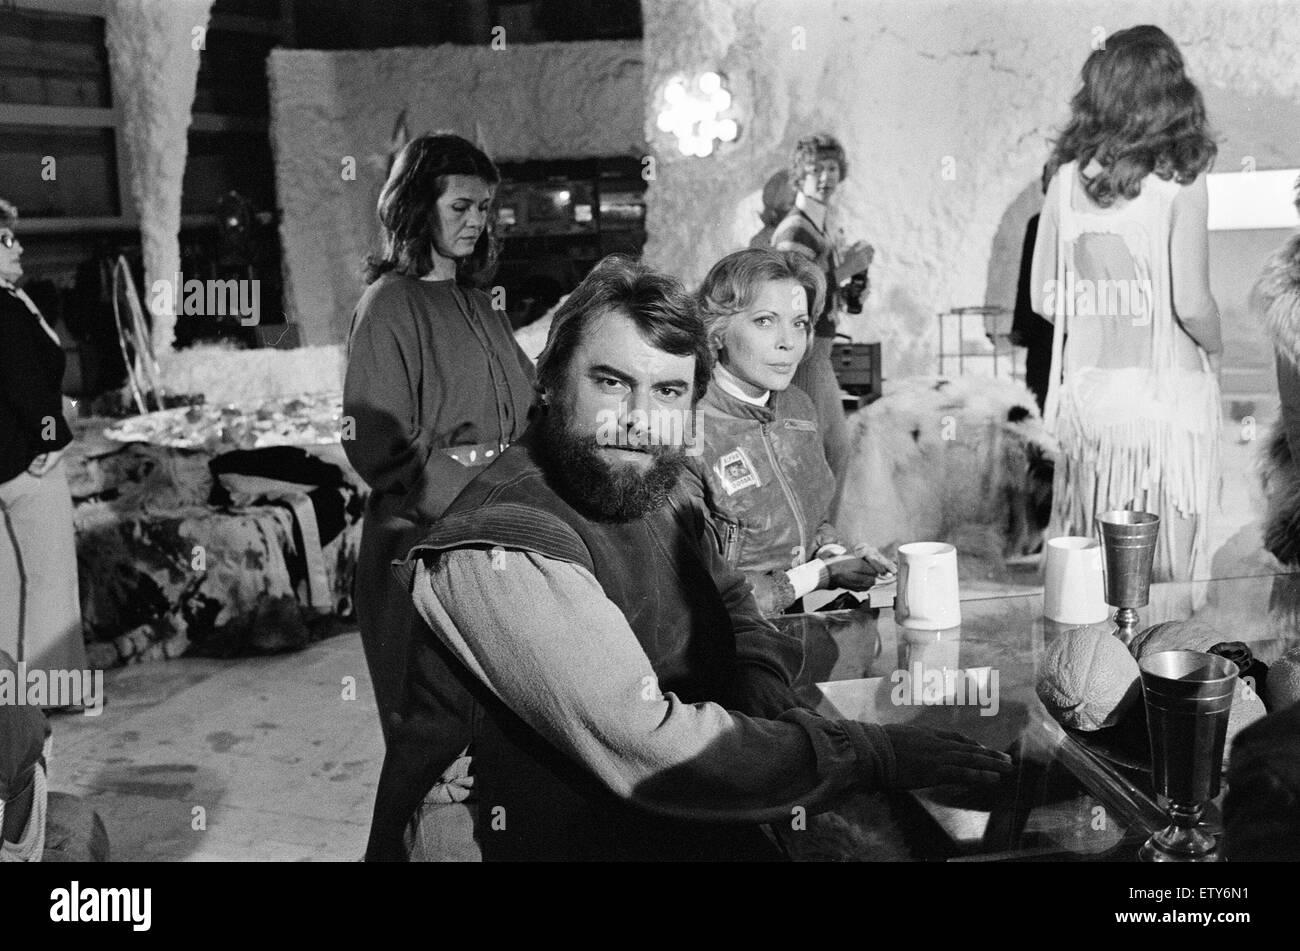 Space 1999, Science Fiction TV Series, filmed at Pinewood Studios, Iver Heath, Buckinghamshire, 25th September 1999. The series ran for two seasons. Starring Barbara Bain as Doctor Helena Russell and guest starring Brian Blessed as Dr. Cabot Rowland. Stock Photo